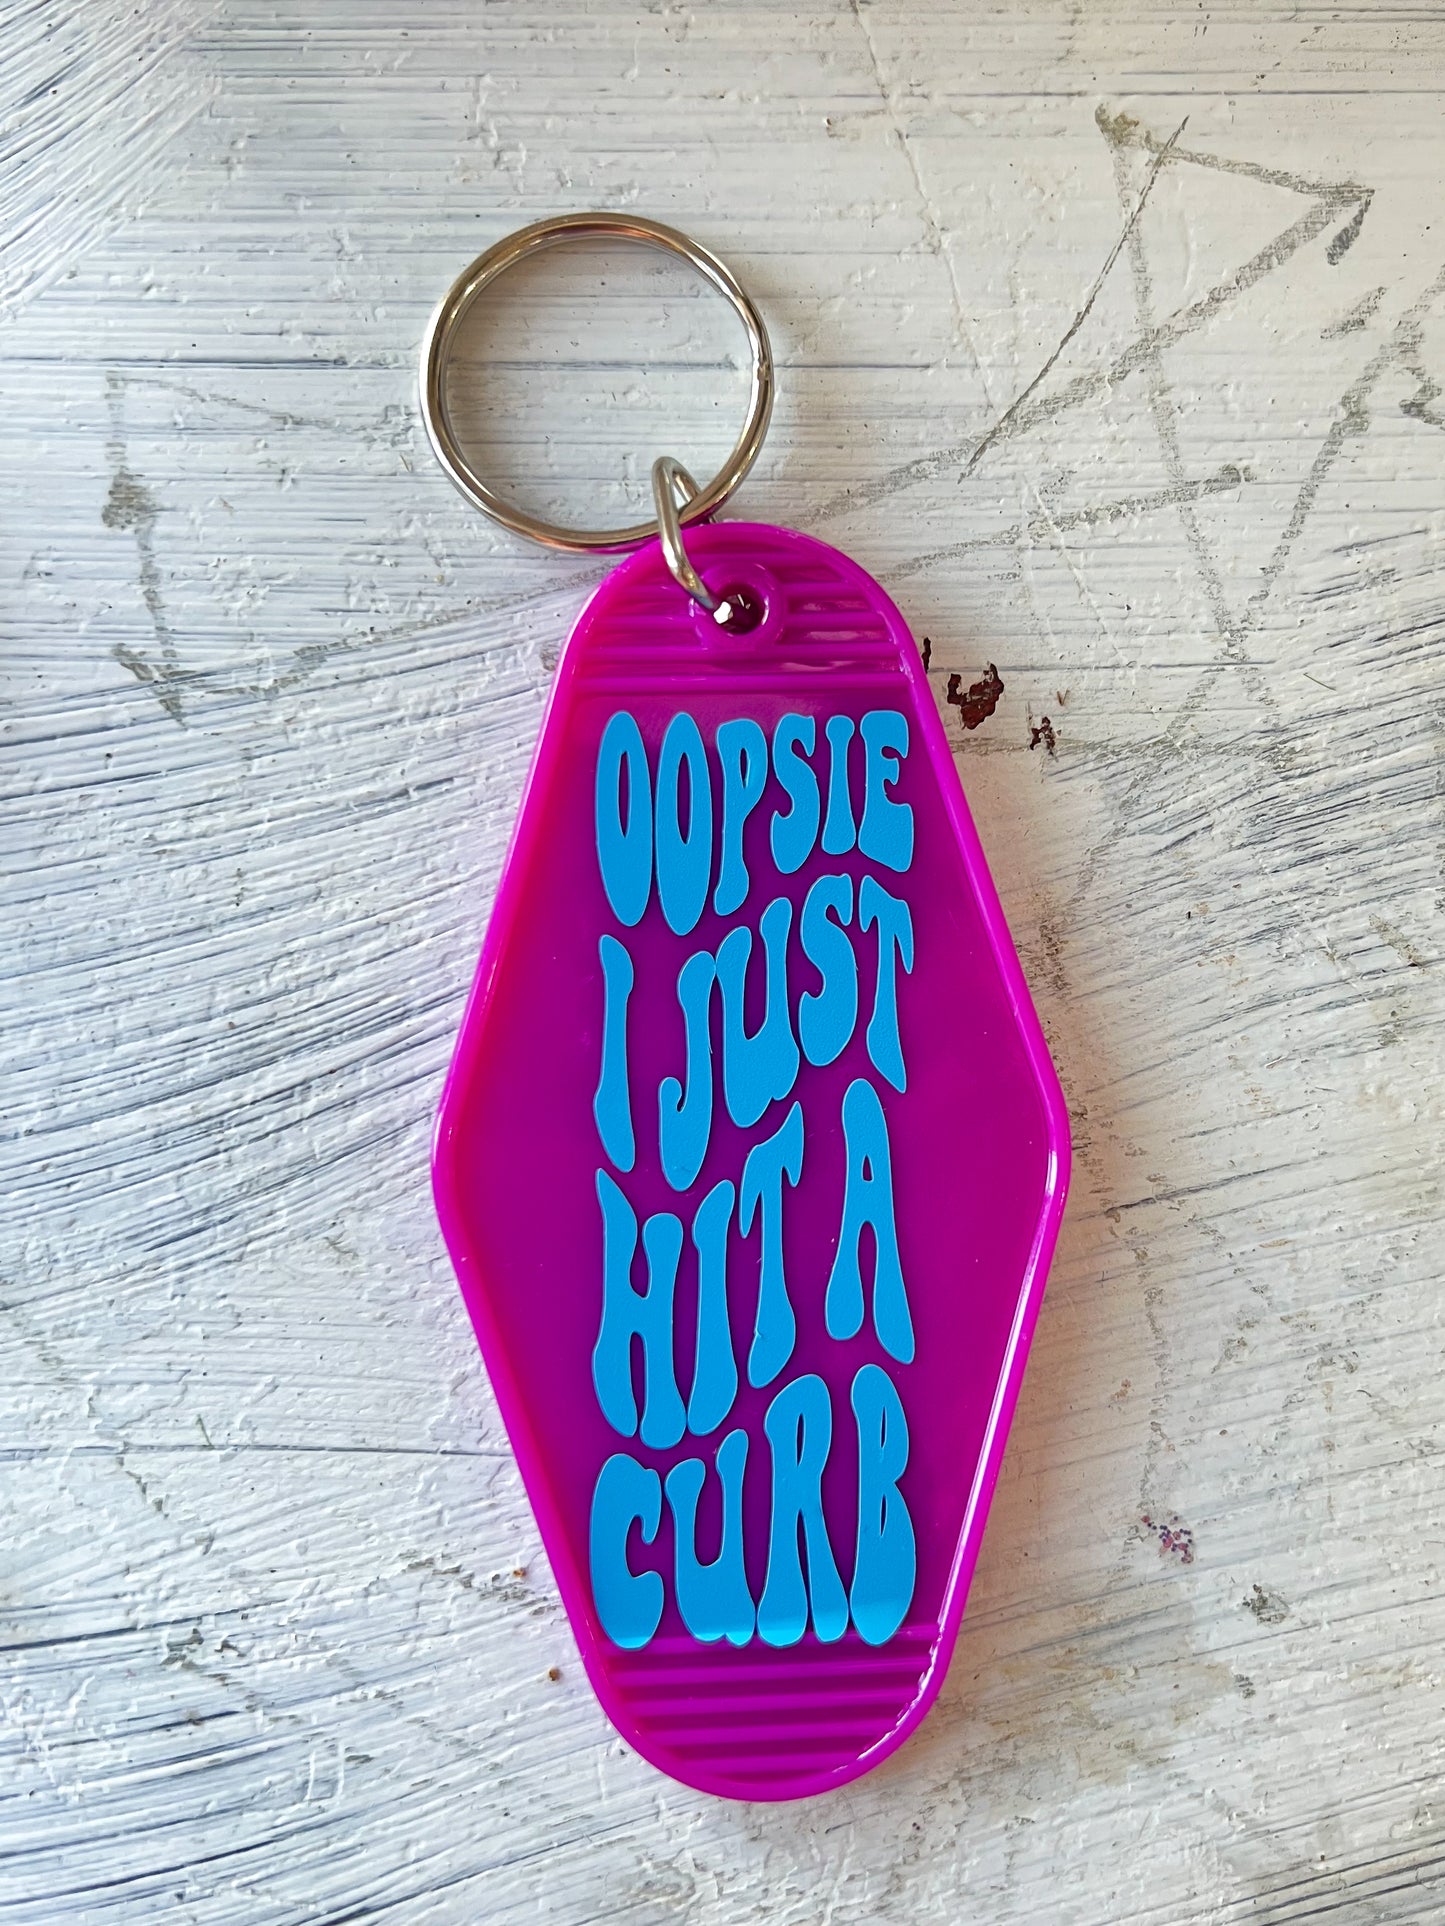 "Oopsie I Just Hit A Curb" Hotel Keychain